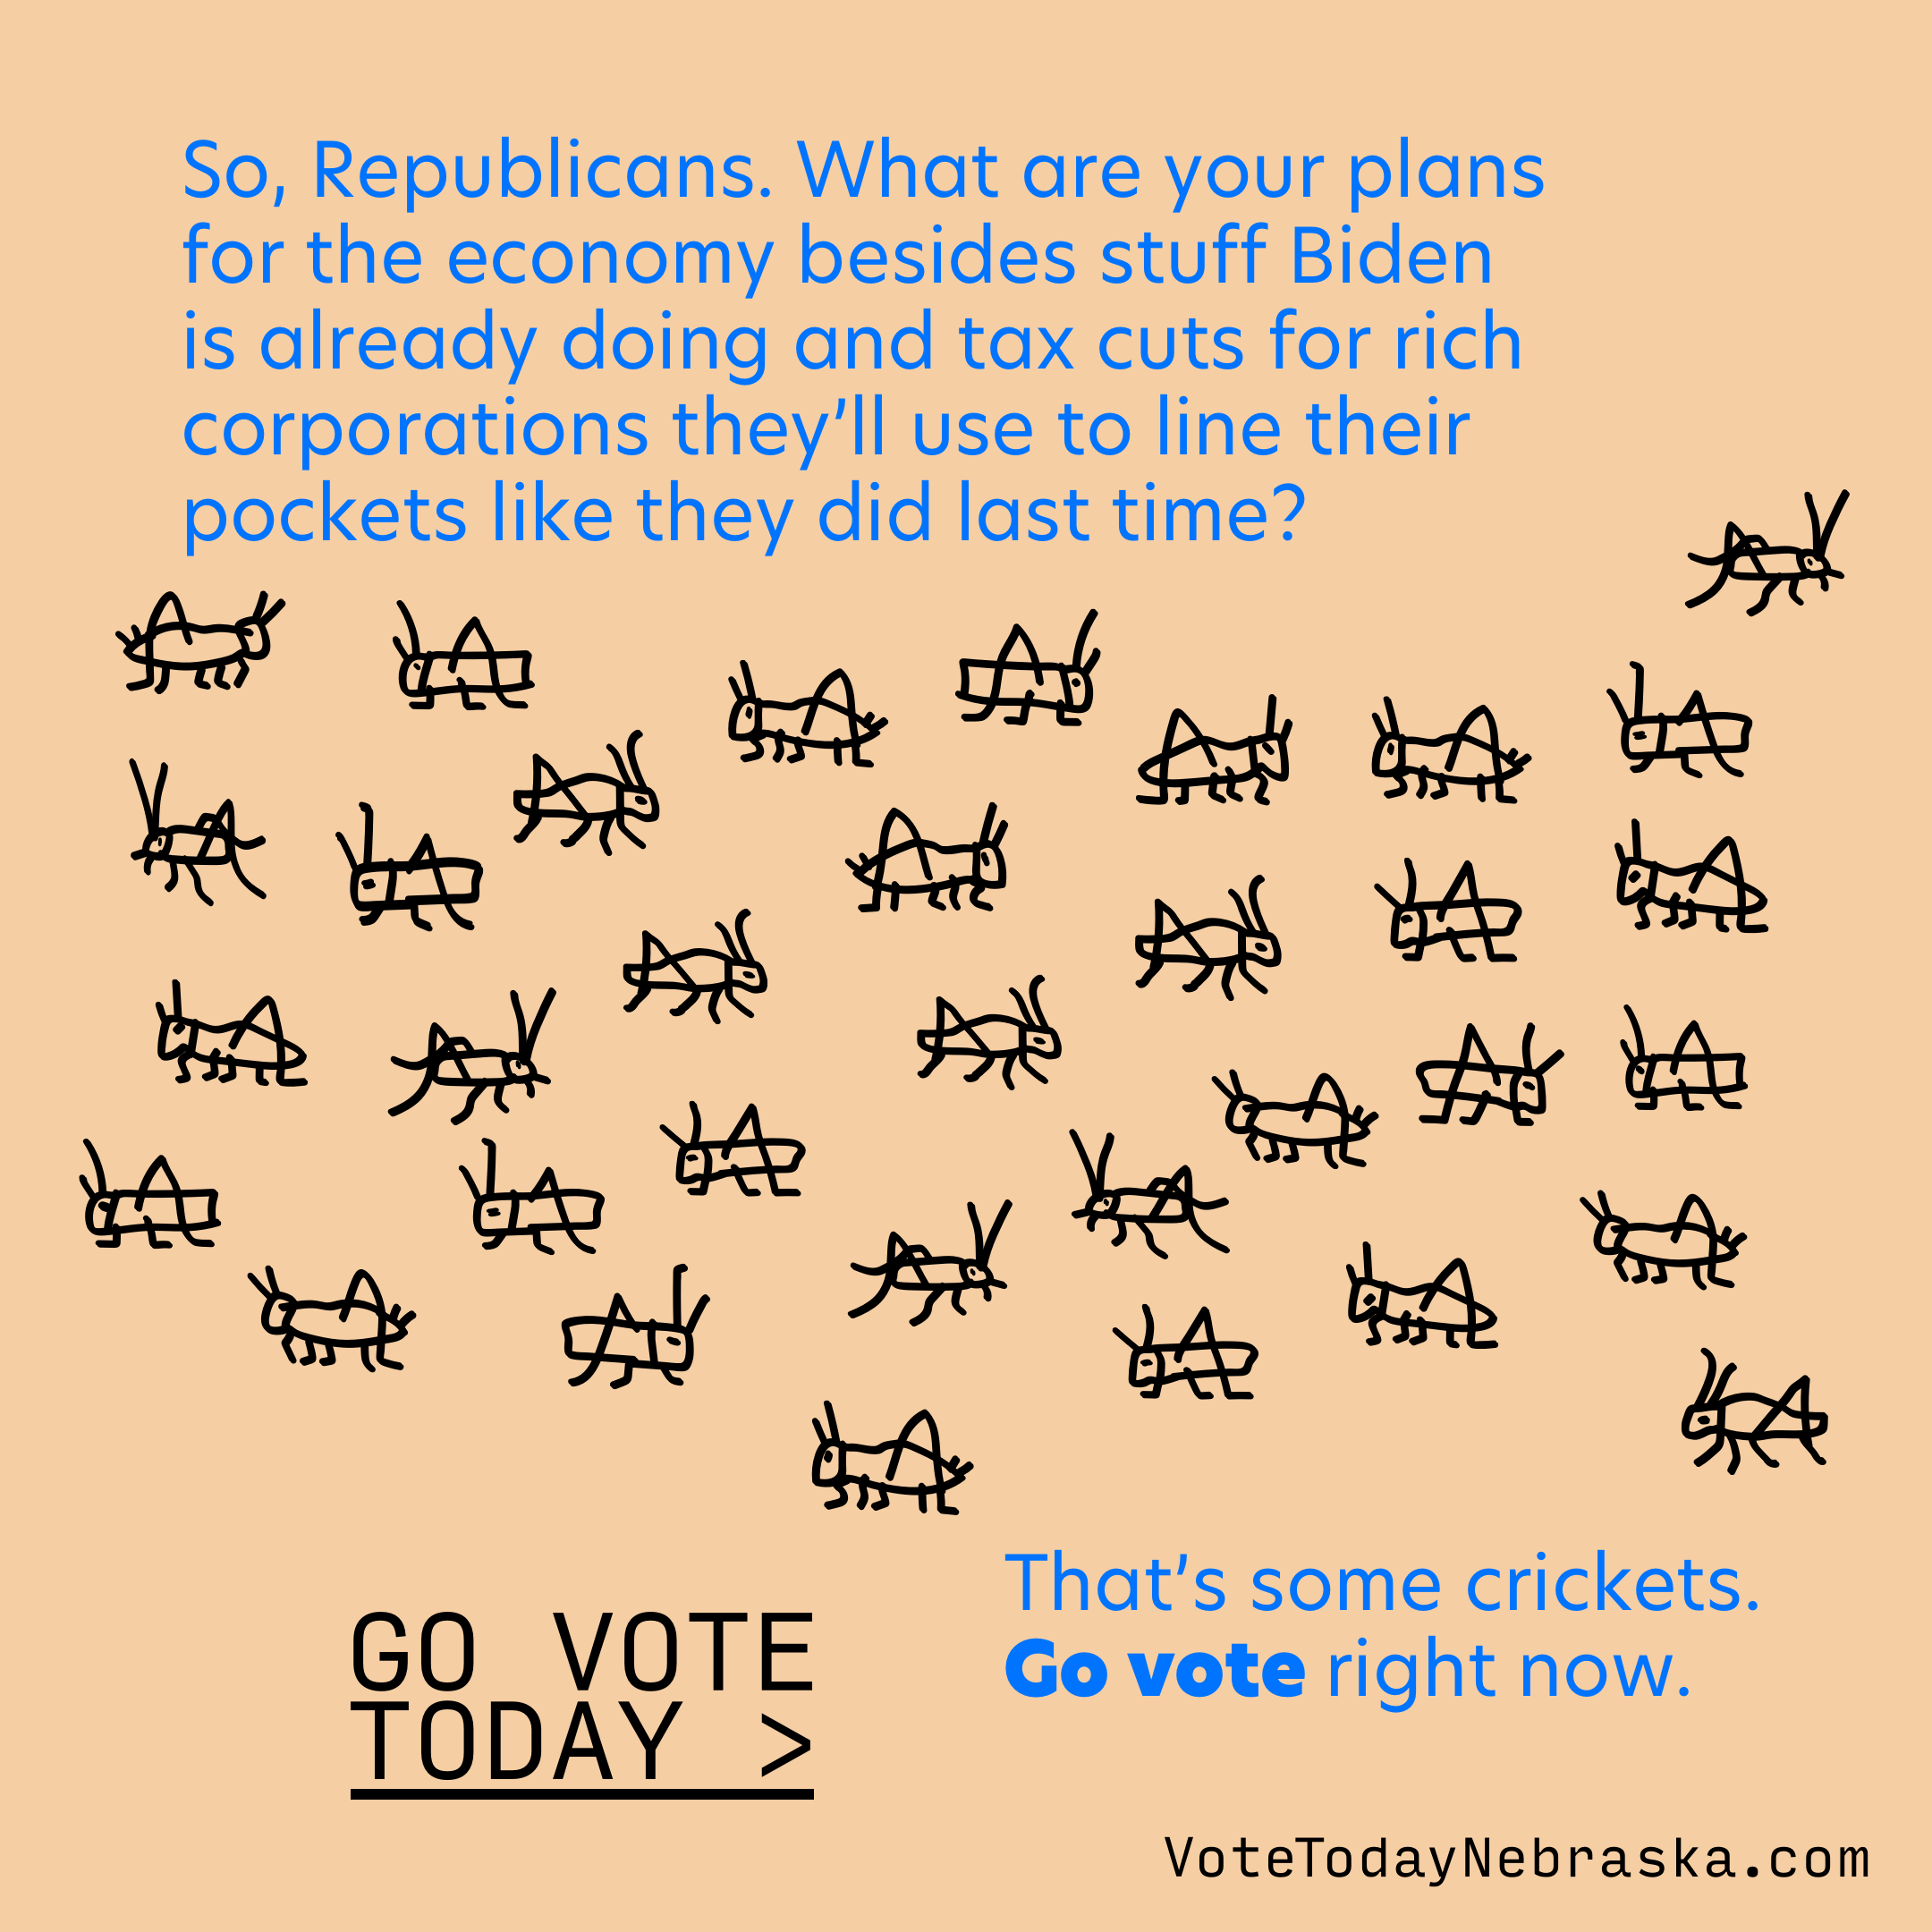 Drawing of small crickets in the shape of a USA map. So, Republicans. What are your plans for the economy besides stuff Biden is already doing and tax cuts for rich corporations they'll use to line their pockets like they did last time? That's some crickets. Go vote right now. Go Vote Today >